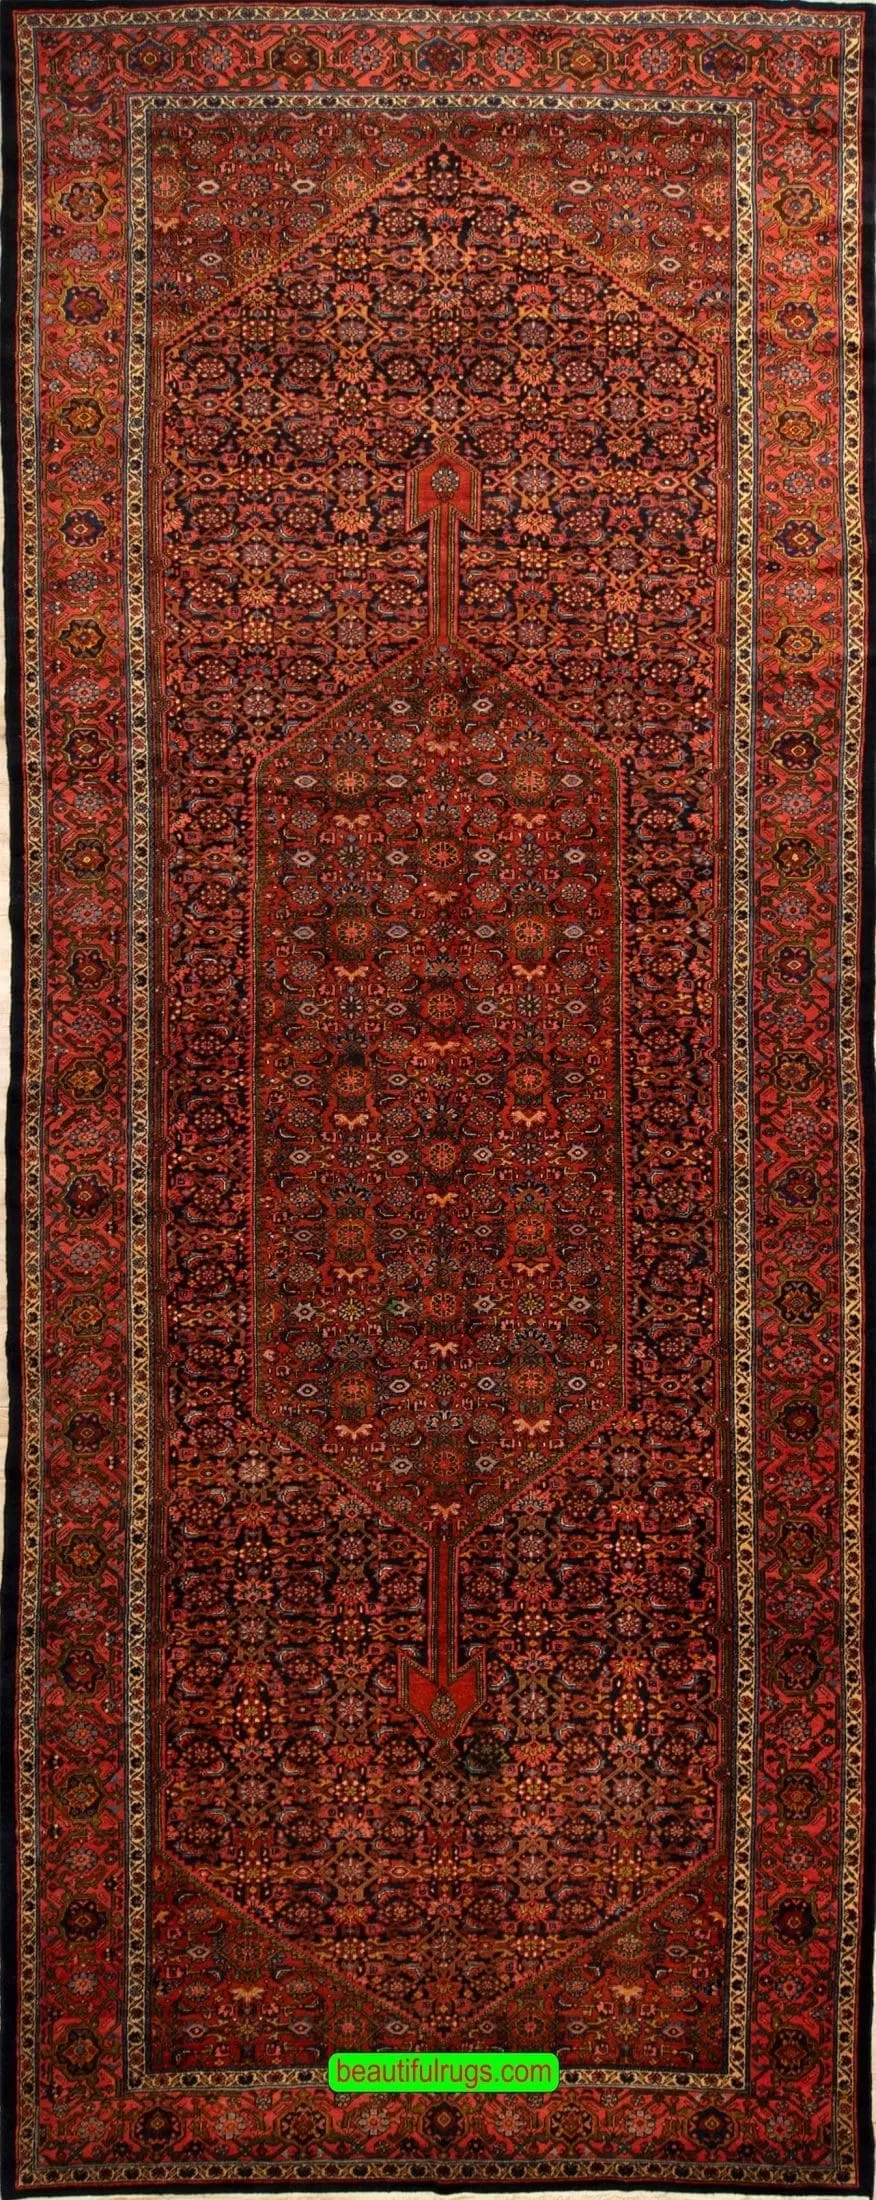 Antique Persian Farahan Rug, Odd Size Rug with Black and Rust Color